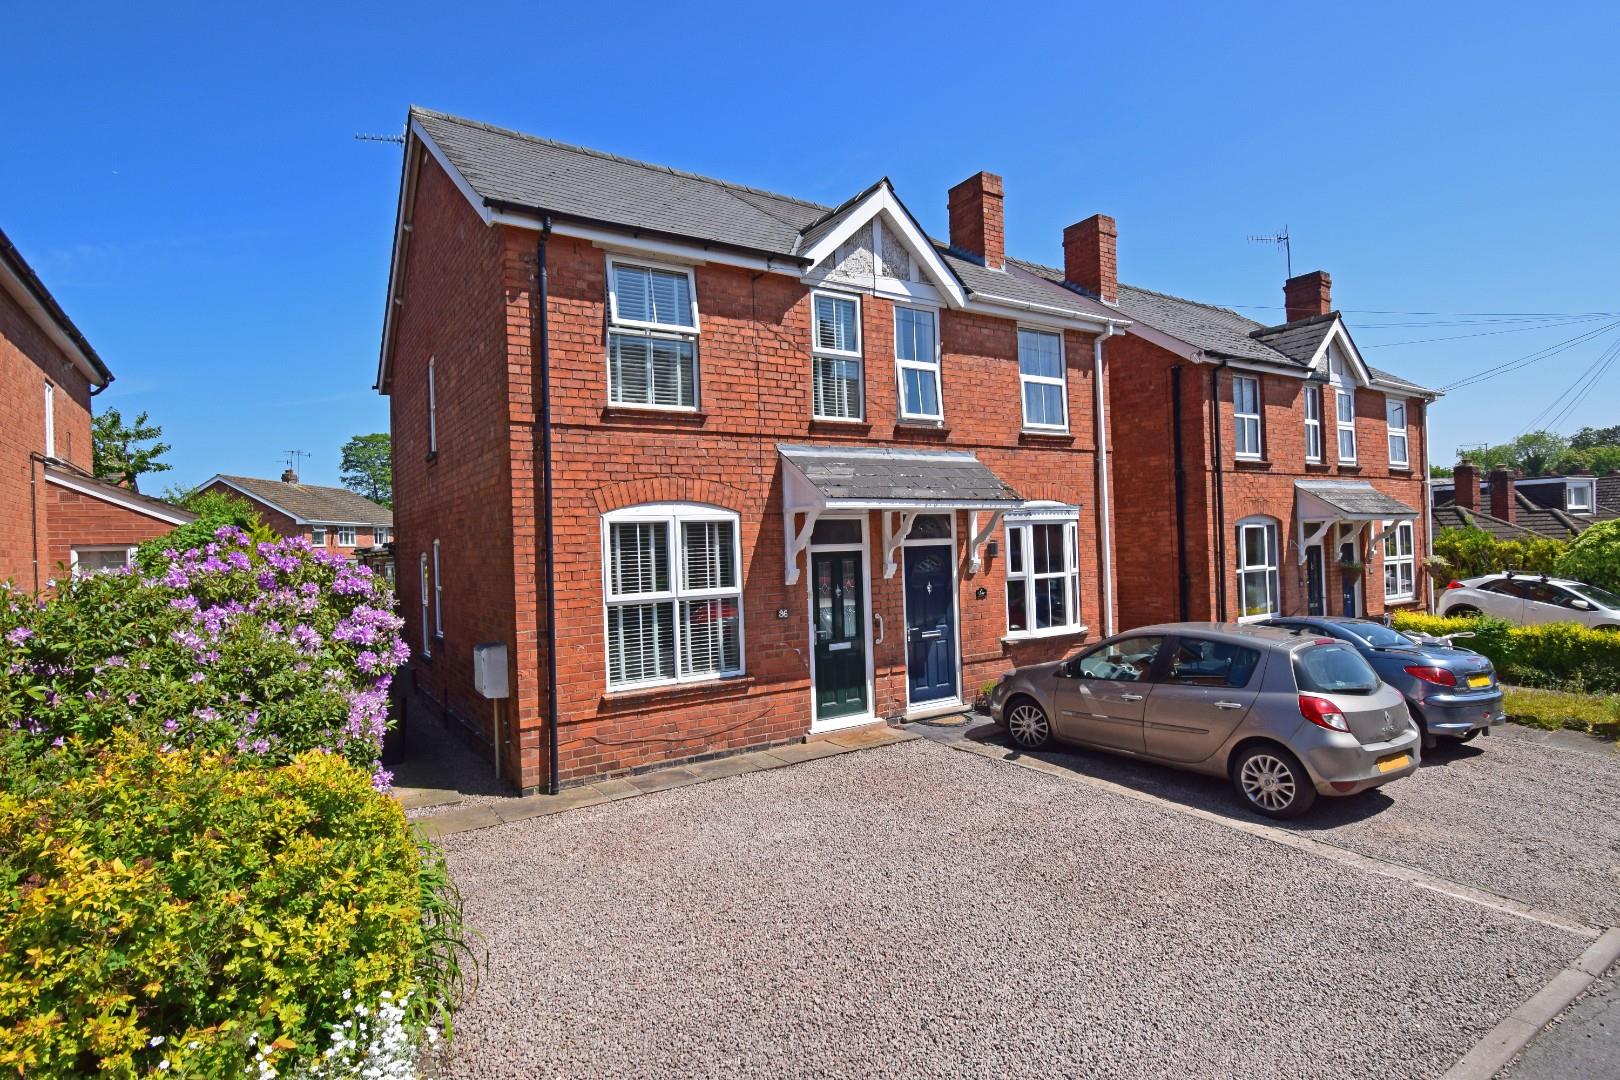 36 Shrubbery Road, Bromsgrove, Worcestershire, B61 7BH